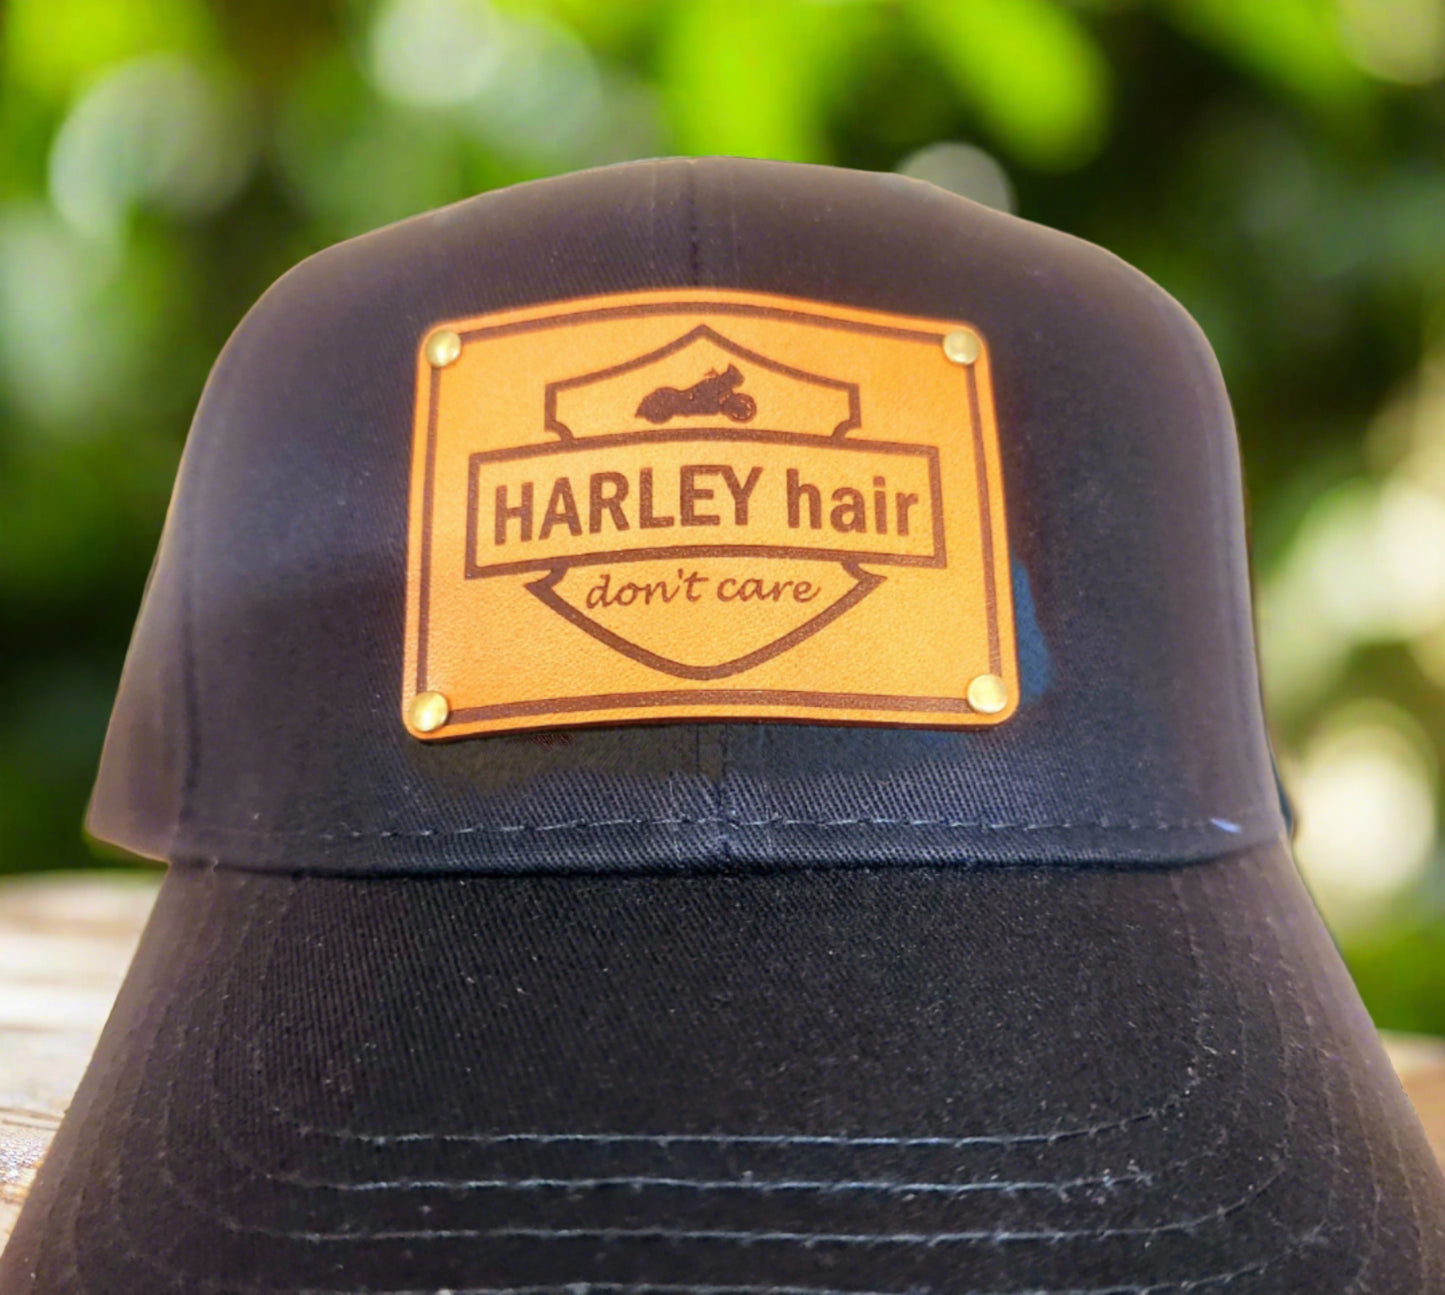 Harley Hair don't Care - hat for riders